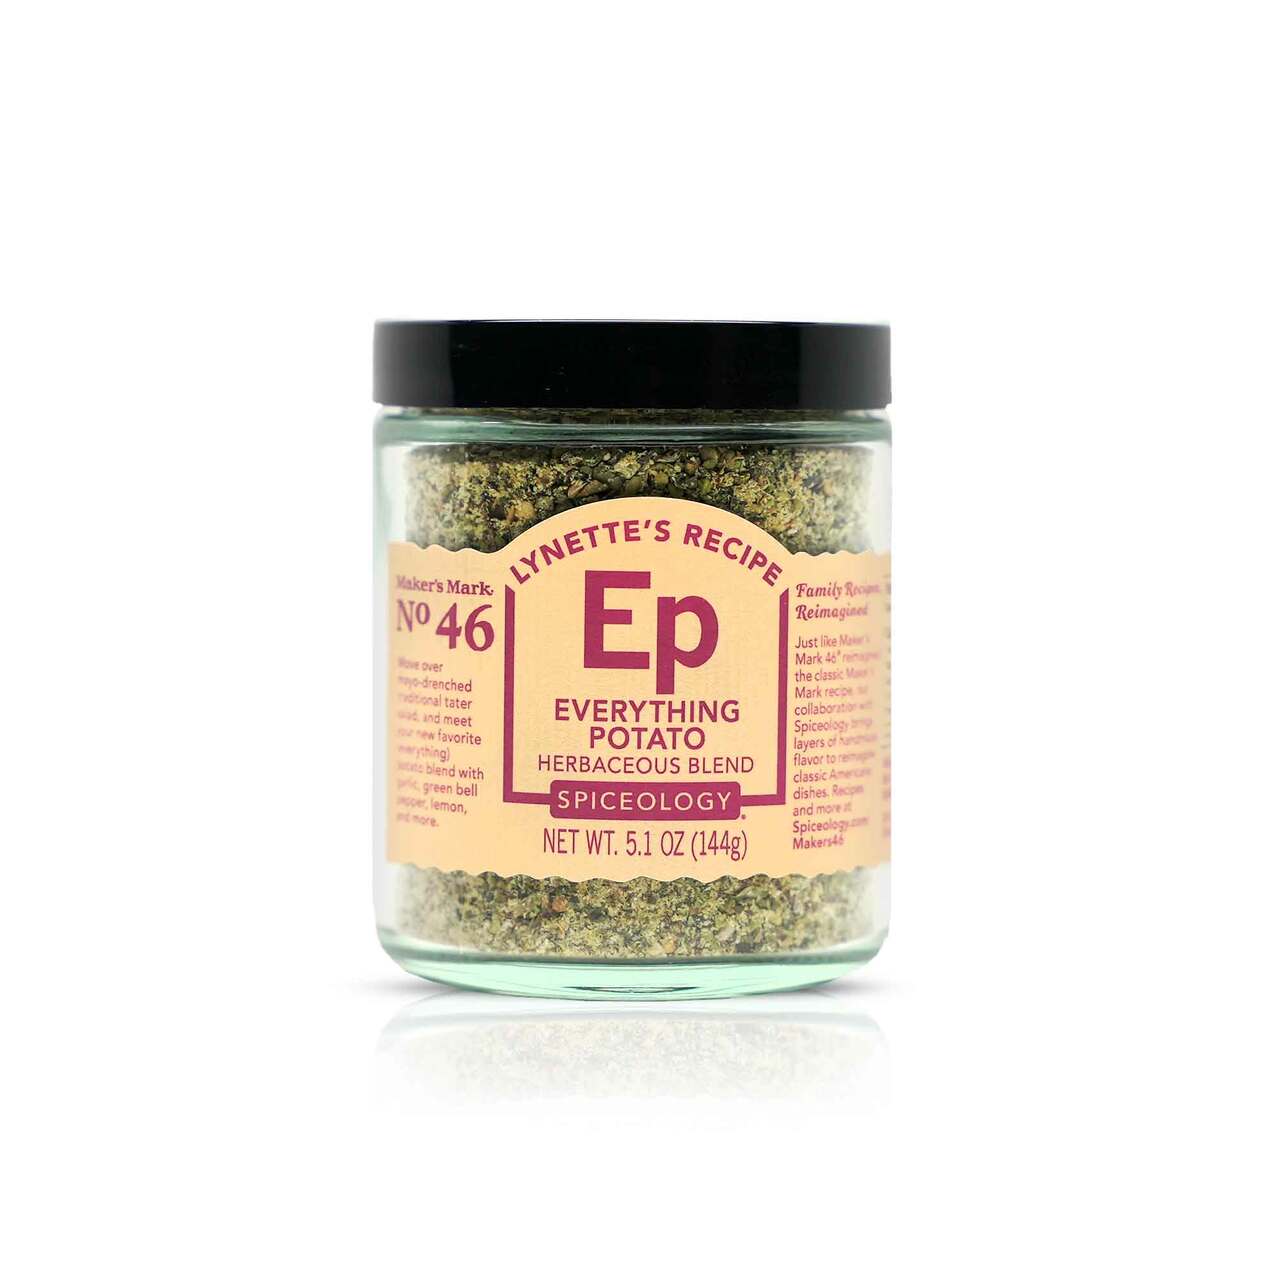 Spiceology Maker’s Mark Everything Potato Herbaceous Spice Blend